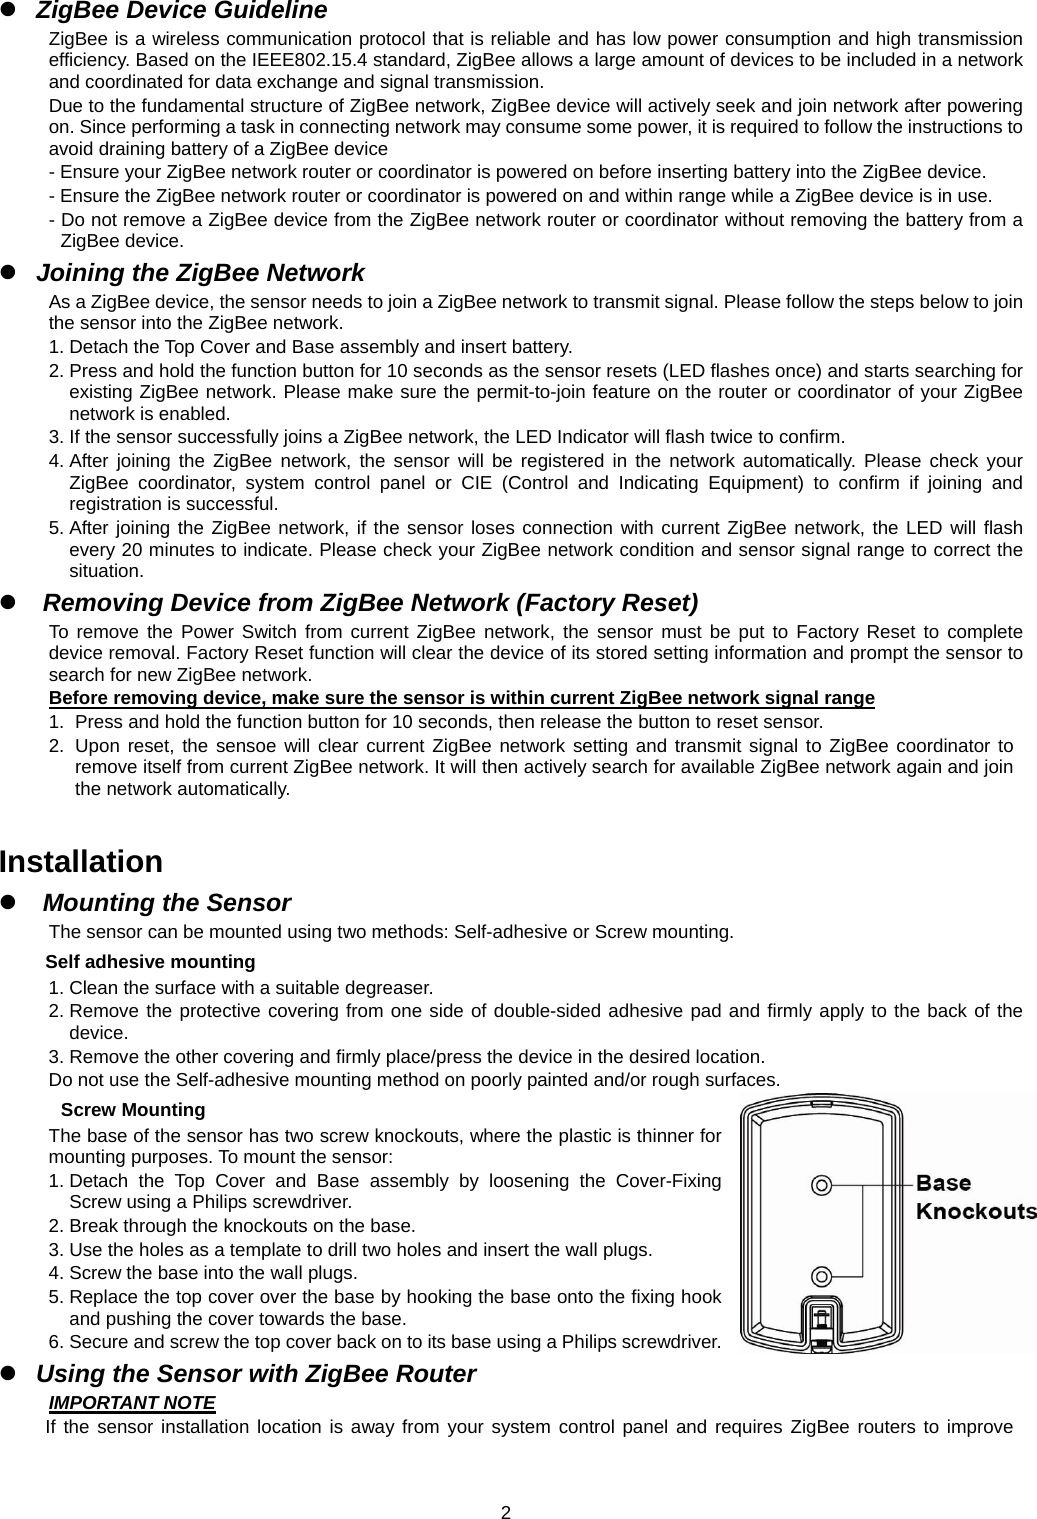  2 ZigBee Device Guideline ZigBee is a wireless communication protocol that is reliable and has low power consumption and high transmission efficiency. Based on the IEEE802.15.4 standard, ZigBee allows a large amount of devices to be included in a network and coordinated for data exchange and signal transmission. Due to the fundamental structure of ZigBee network, ZigBee device will actively seek and join network after powering on. Since performing a task in connecting network may consume some power, it is required to follow the instructions to avoid draining battery of a ZigBee device - Ensure your ZigBee network router or coordinator is powered on before inserting battery into the ZigBee device. - Ensure the ZigBee network router or coordinator is powered on and within range while a ZigBee device is in use. - Do not remove a ZigBee device from the ZigBee network router or coordinator without removing the battery from a ZigBee device.  Joining the ZigBee Network As a ZigBee device, the sensor needs to join a ZigBee network to transmit signal. Please follow the steps below to join the sensor into the ZigBee network. 1. Detach the Top Cover and Base assembly and insert battery. 2. Press and hold the function button for 10 seconds as the sensor resets (LED flashes once) and starts searching for existing ZigBee network. Please make sure the permit-to-join feature on the router or coordinator of your ZigBee network is enabled. 3. If the sensor successfully joins a ZigBee network, the LED Indicator will flash twice to confirm. 4. After joining the ZigBee network, the sensor will be registered in the network automatically. Please check your ZigBee coordinator, system control panel or CIE (Control and Indicating Equipment) to confirm if joining and registration is successful. 5. After joining the ZigBee network, if the sensor loses connection with current ZigBee network, the LED will flash every 20 minutes to indicate. Please check your ZigBee network condition and sensor signal range to correct the situation.  Removing Device from ZigBee Network (Factory Reset) To remove the Power Switch from current ZigBee network, the sensor must be put to Factory Reset to complete device removal. Factory Reset function will clear the device of its stored setting information and prompt the sensor to search for new ZigBee network.   Before removing device, make sure the sensor is within current ZigBee network signal range 1.  Press and hold the function button for 10 seconds, then release the button to reset sensor. 2.  Upon reset, the sensoe will clear current ZigBee network setting and transmit signal to ZigBee coordinator to remove itself from current ZigBee network. It will then actively search for available ZigBee network again and join the network automatically.    Installation  Mounting the Sensor The sensor can be mounted using two methods: Self-adhesive or Screw mounting. Self adhesive mounting 1. Clean the surface with a suitable degreaser. 2. Remove the protective covering from one side of double-sided adhesive pad and firmly apply to the back of the device. 3. Remove the other covering and firmly place/press the device in the desired location. Do not use the Self-adhesive mounting method on poorly painted and/or rough surfaces. Screw Mounting The base of the sensor has two screw knockouts, where the plastic is thinner for mounting purposes. To mount the sensor: 1. Detach the Top Cover and Base assembly by loosening the Cover-Fixing Screw using a Philips screwdriver. 2. Break through the knockouts on the base. 3. Use the holes as a template to drill two holes and insert the wall plugs. 4. Screw the base into the wall plugs. 5. Replace the top cover over the base by hooking the base onto the fixing hook and pushing the cover towards the base. 6. Secure and screw the top cover back on to its base using a Philips screwdriver.  Using the Sensor with ZigBee Router IMPORTANT NOTE If the sensor installation location is away from your system control panel and requires ZigBee routers to improve 